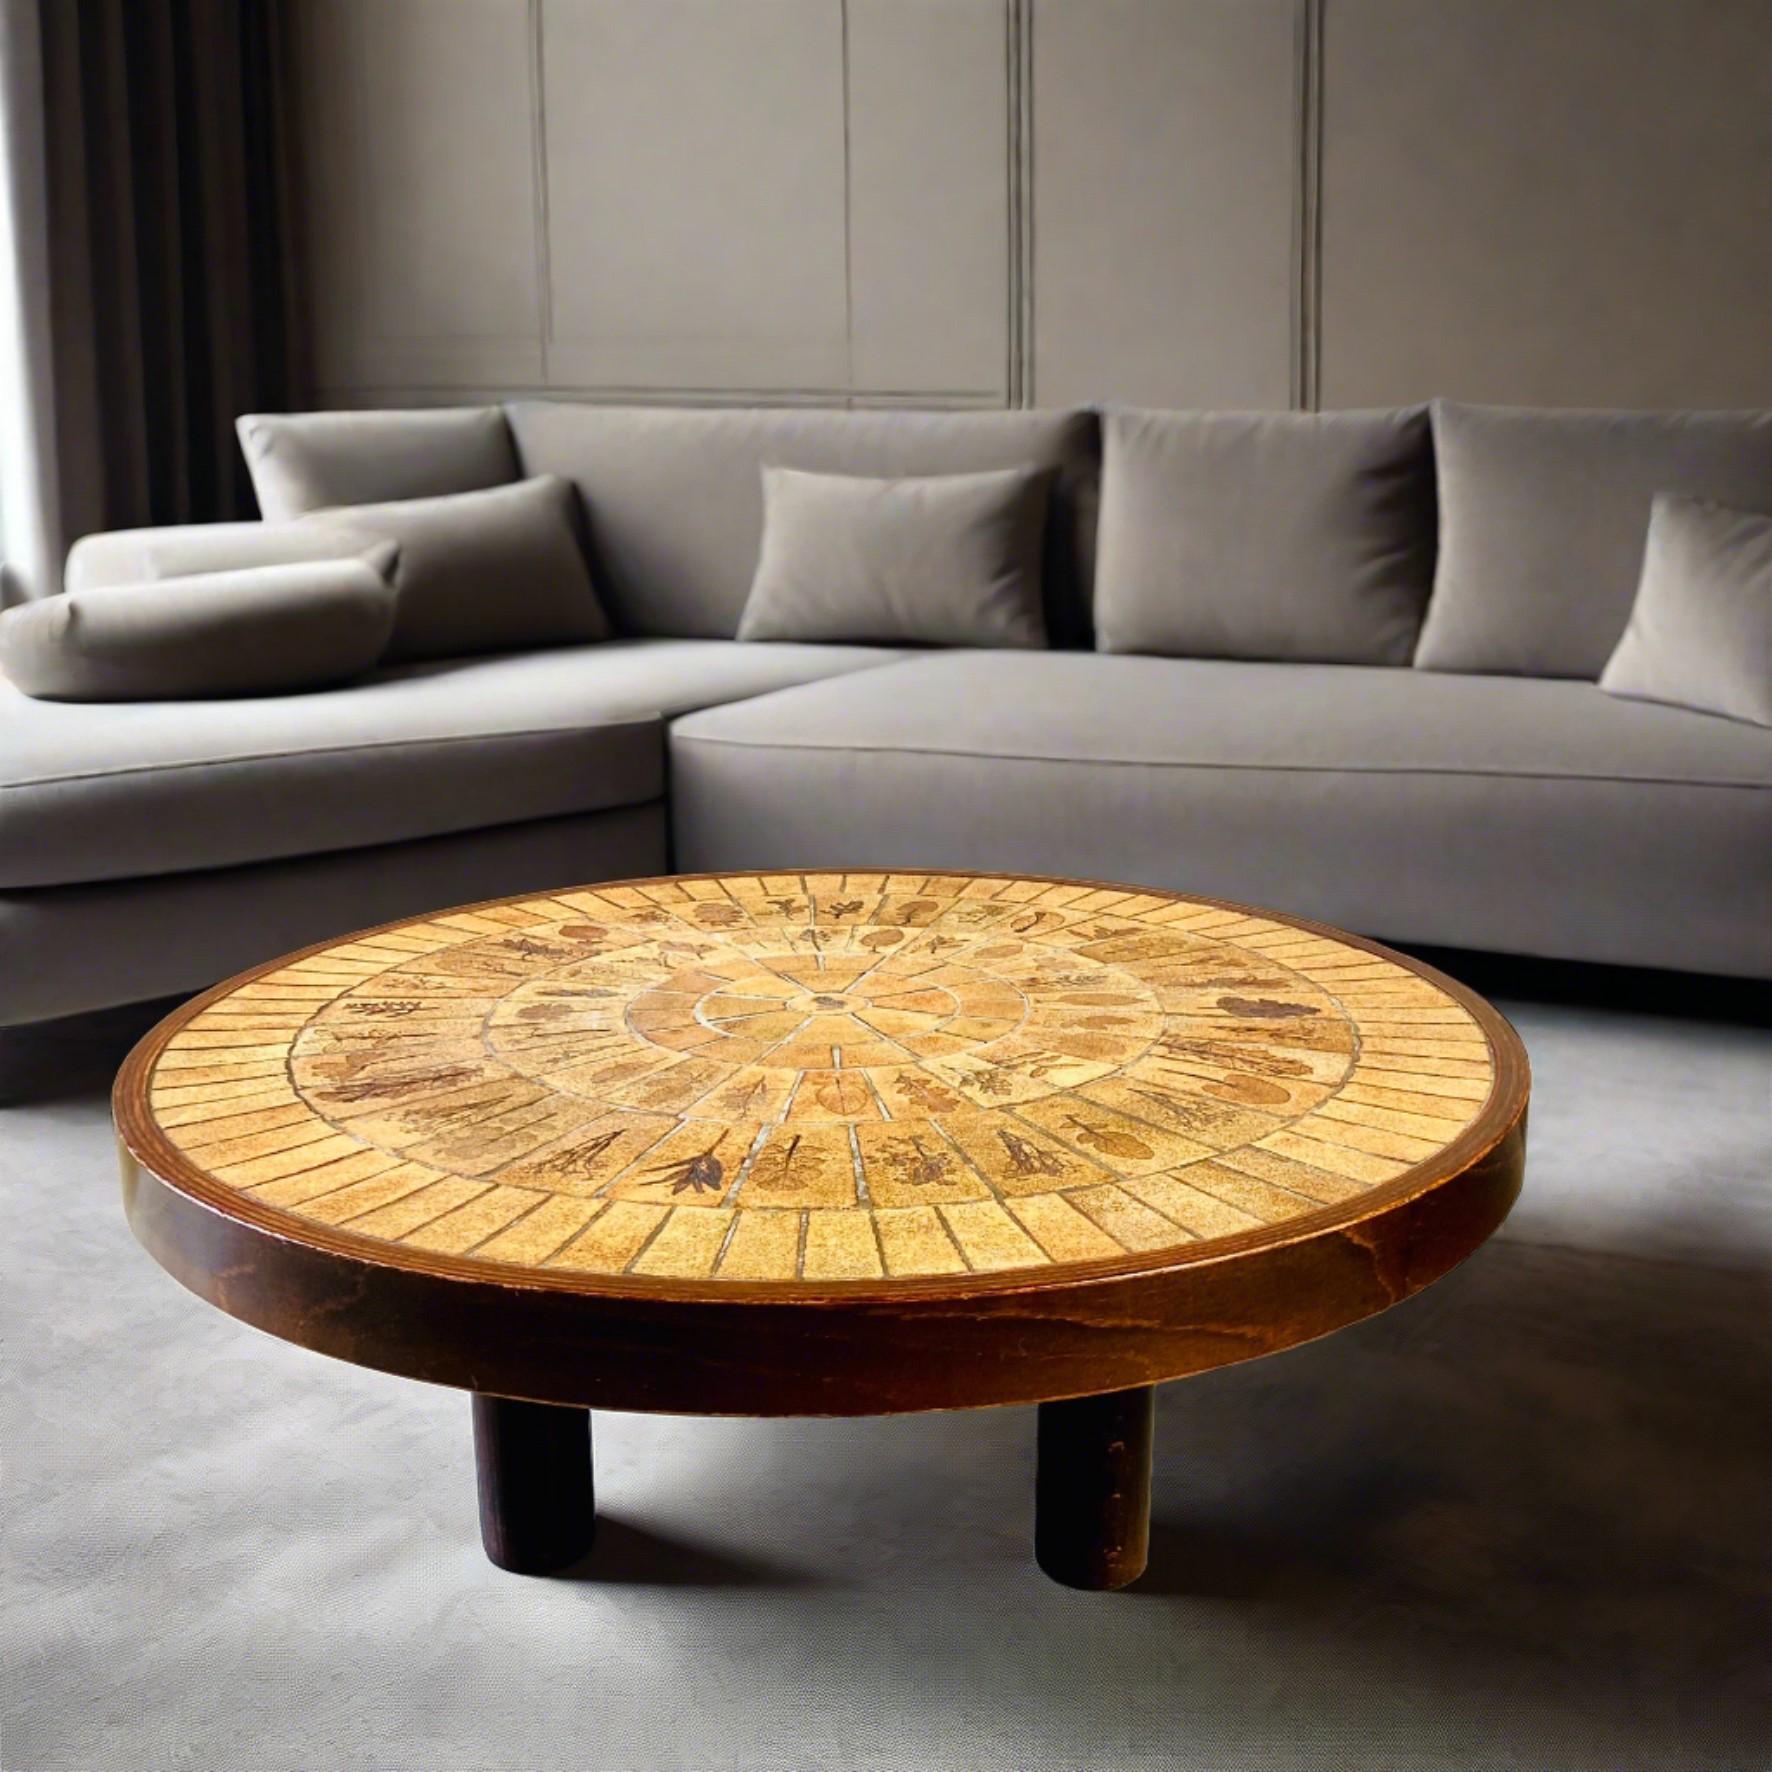 Round Brutalist Ceramic Coffee Table by Roger Capron, France 1960 For Sale 2